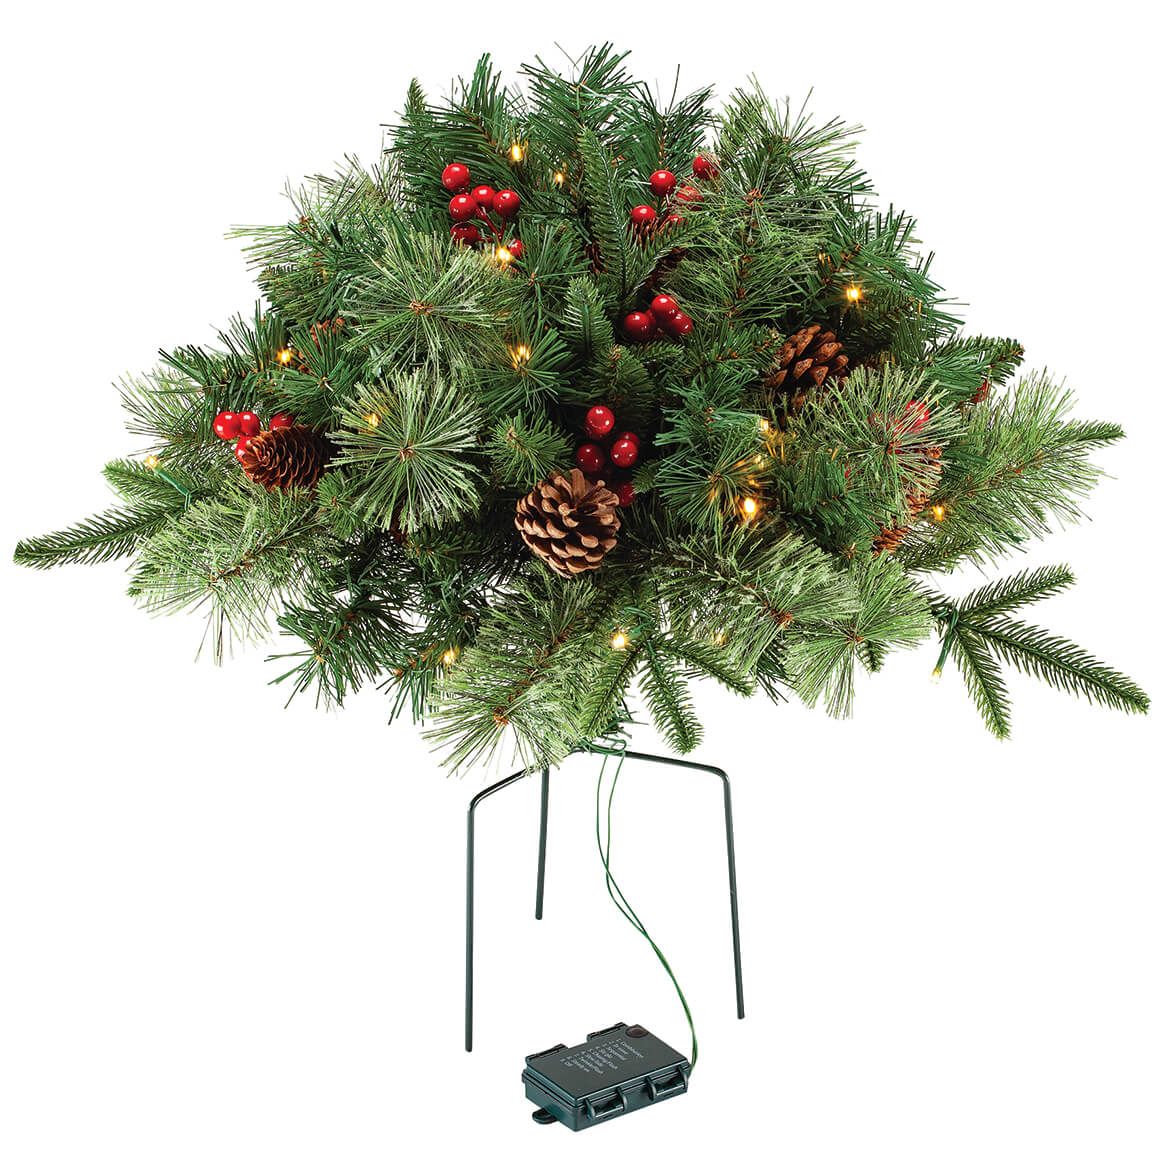 Lighted Christmas Urn Filler with Stand By OakRidge™ + '-' + 375828